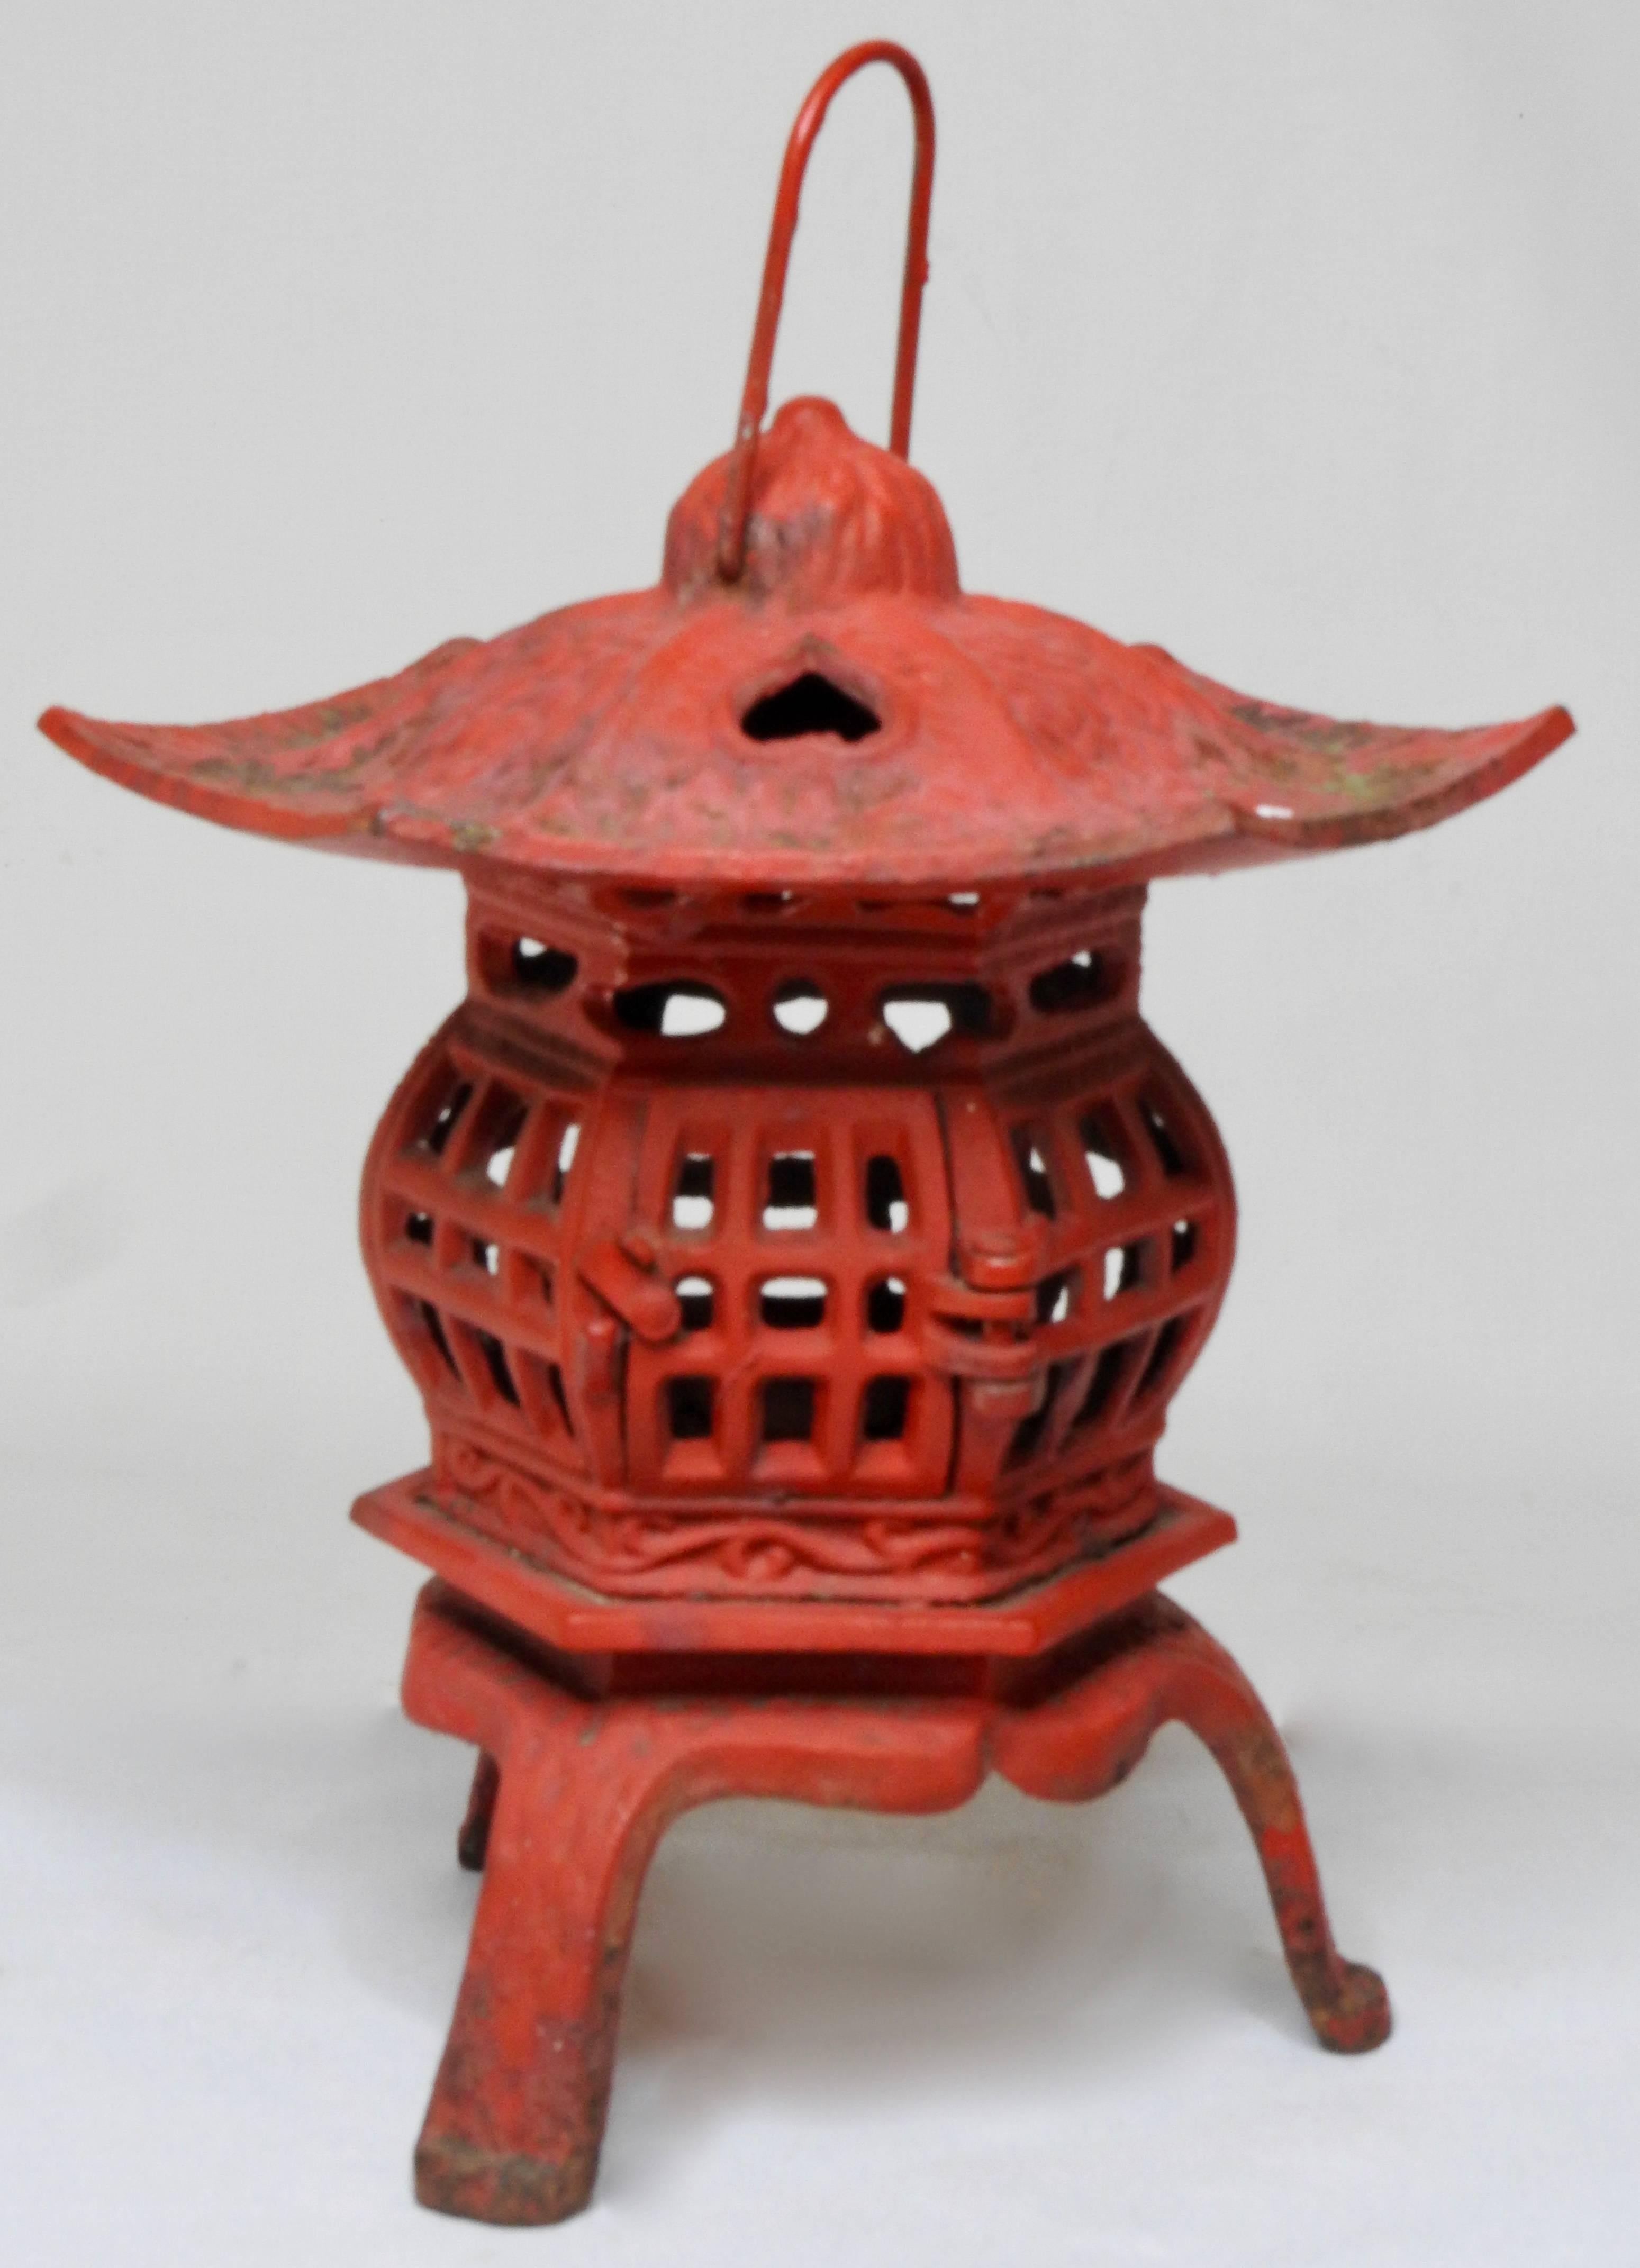 This vintage pagoda lamp is painted in a vibrant red color. It sits on three legs that with a curvy skirting. Has a hexagonal shape with open cut-out and an access door with latch and hinges. The top has a heart shaped cut-out and a hook for hanging.